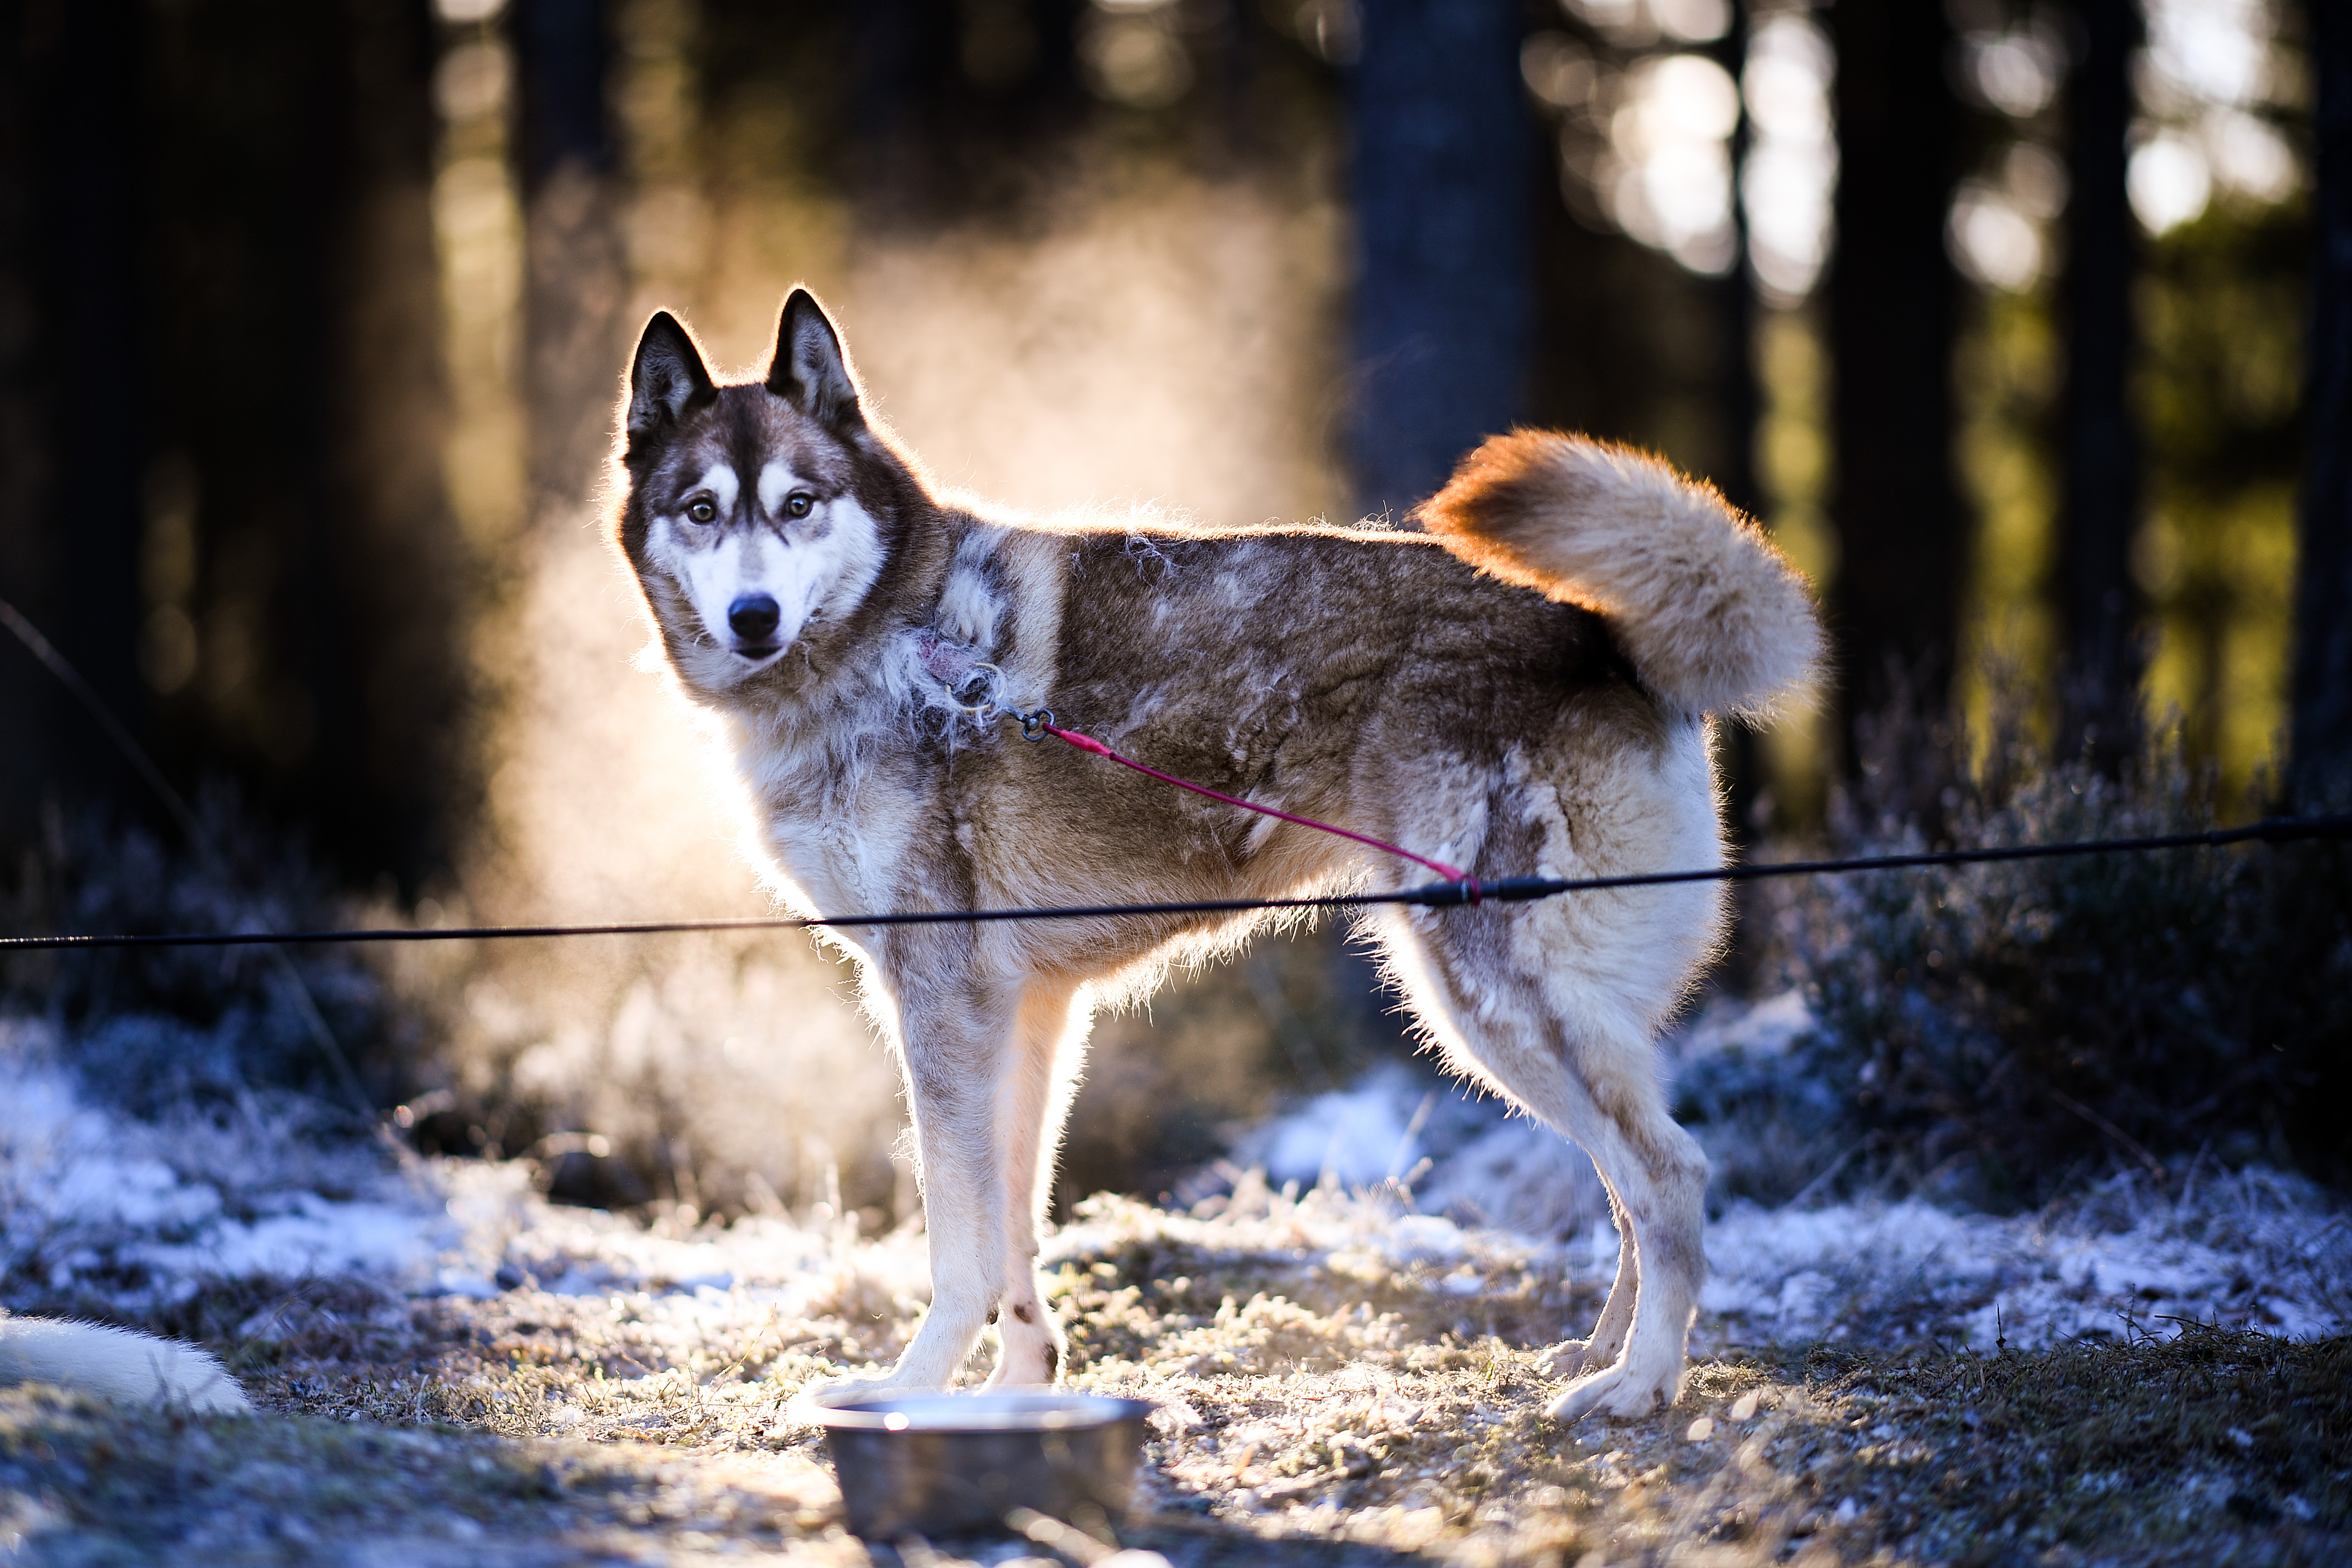 Huskies practice at a forest course ahead of the Aviemore Sled Dog Rally  in Feshiebridge, Scotland. Huskies and sledders prepare ahead of the Siberian Husky Club of Great Britain 36th race taking place at Loch Morlich this weekend near Aviemore.